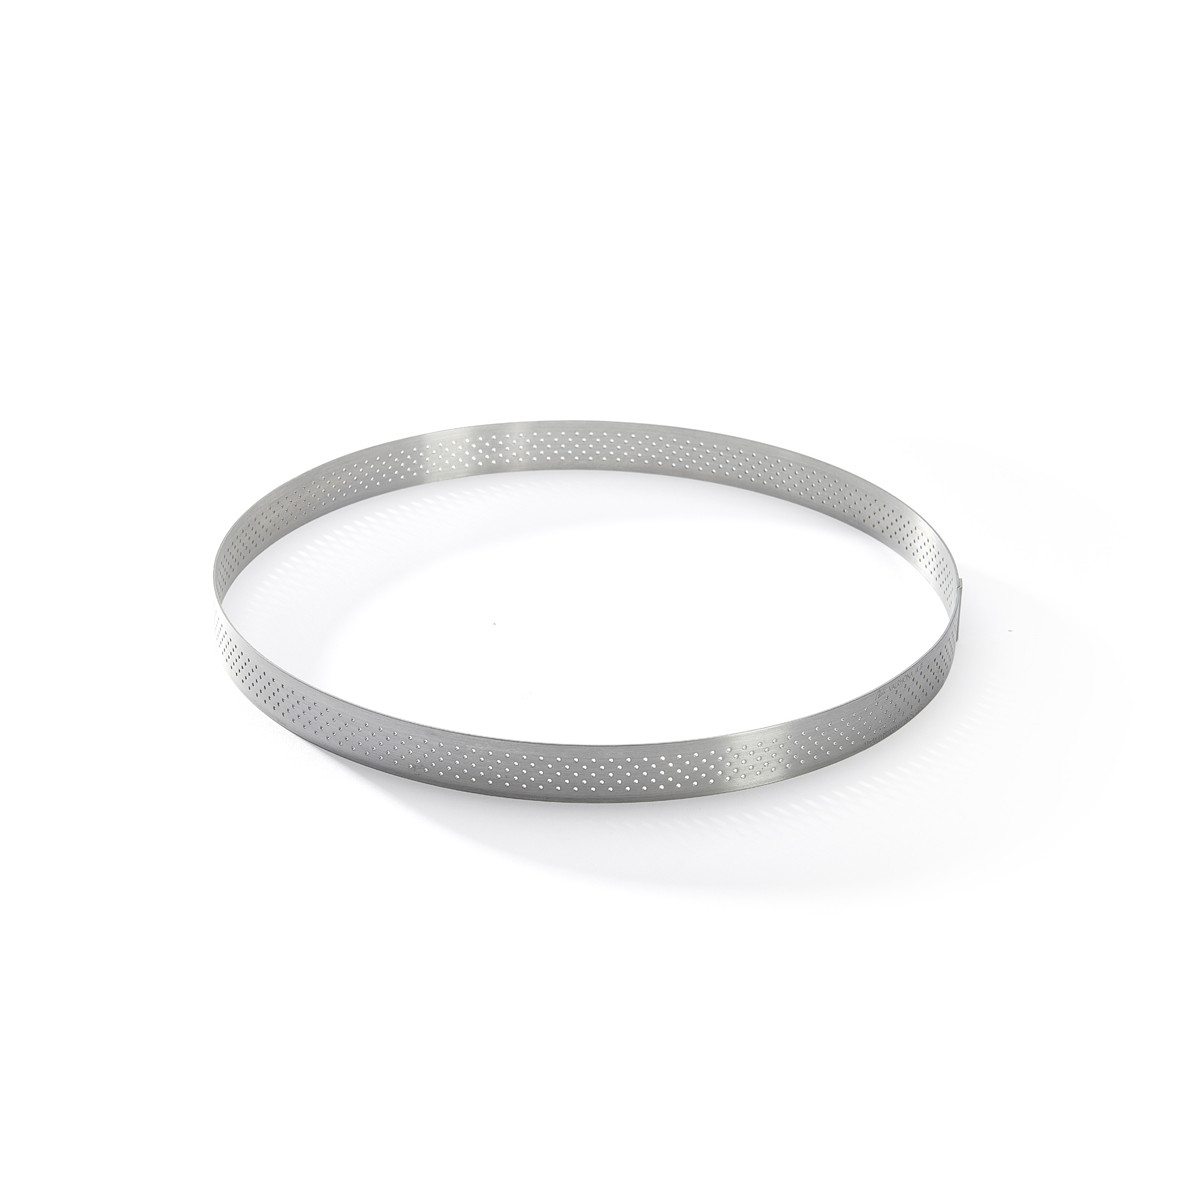 Round tart ring Ht 2 cm VALRHONA, perforated stainless steel, stainless ...